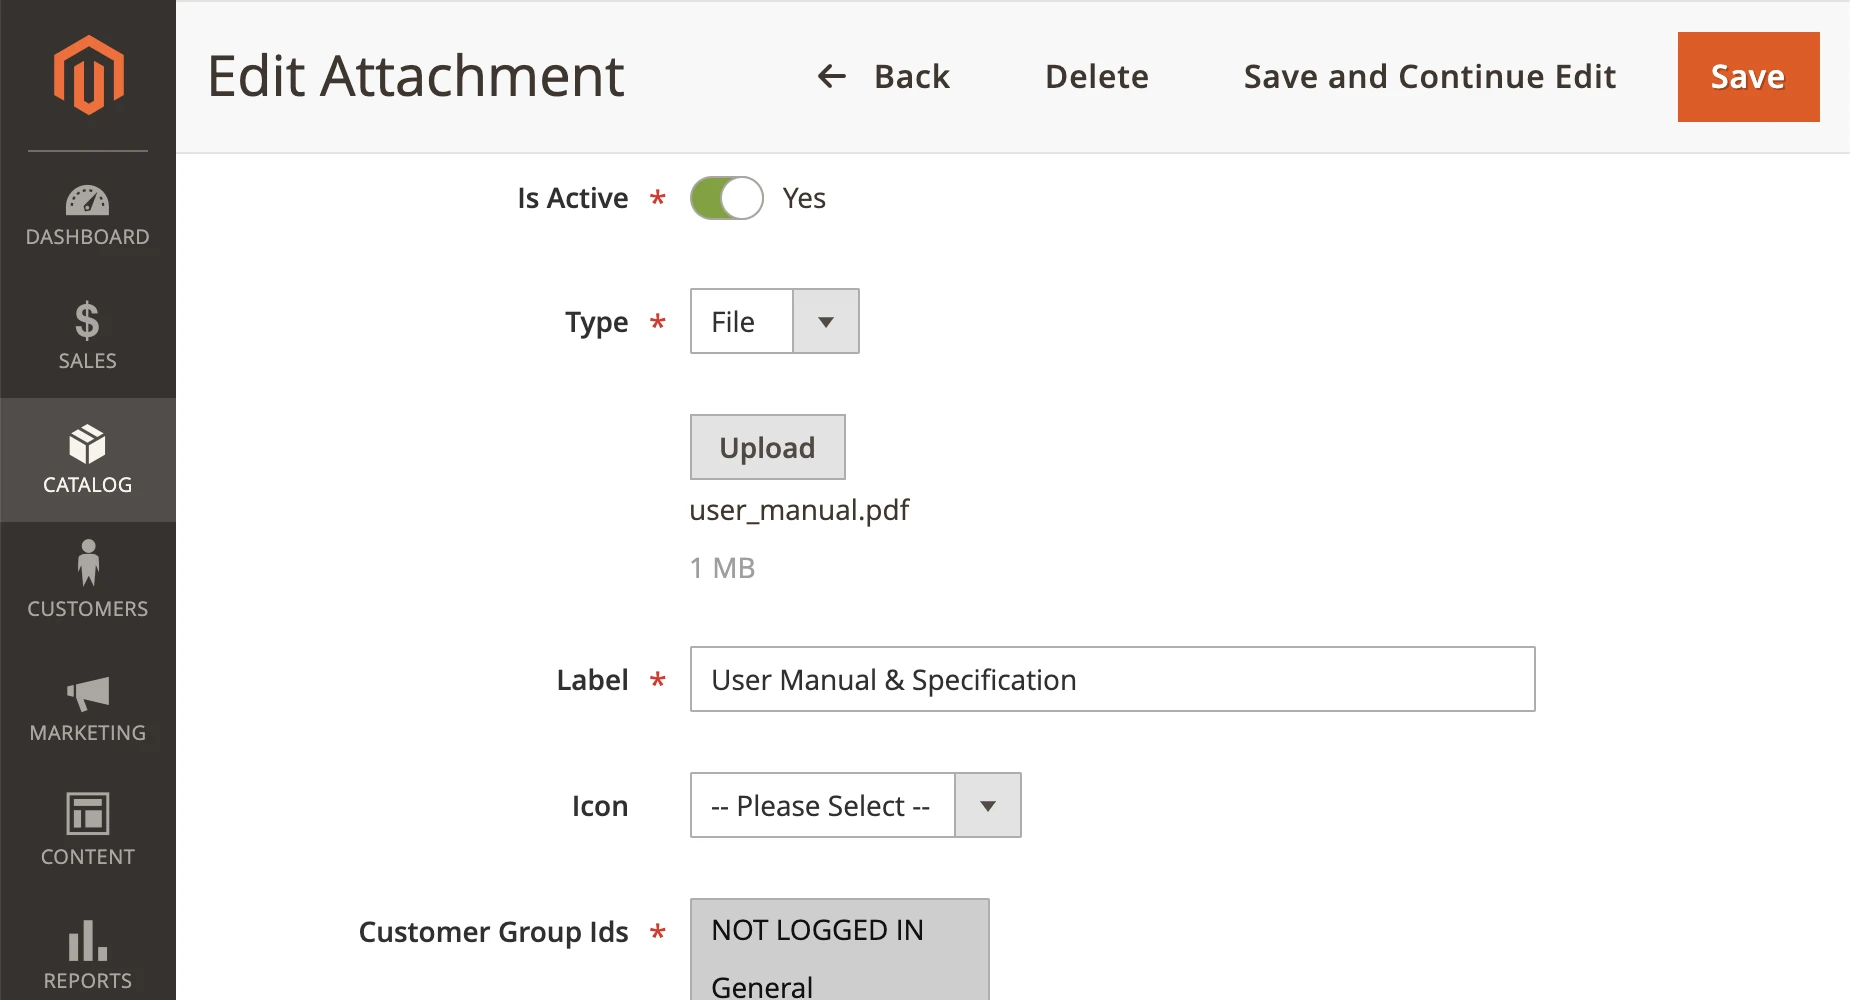 Editing product attachments from Mirasvit Magento 2 Product Attachment module directly on the pages